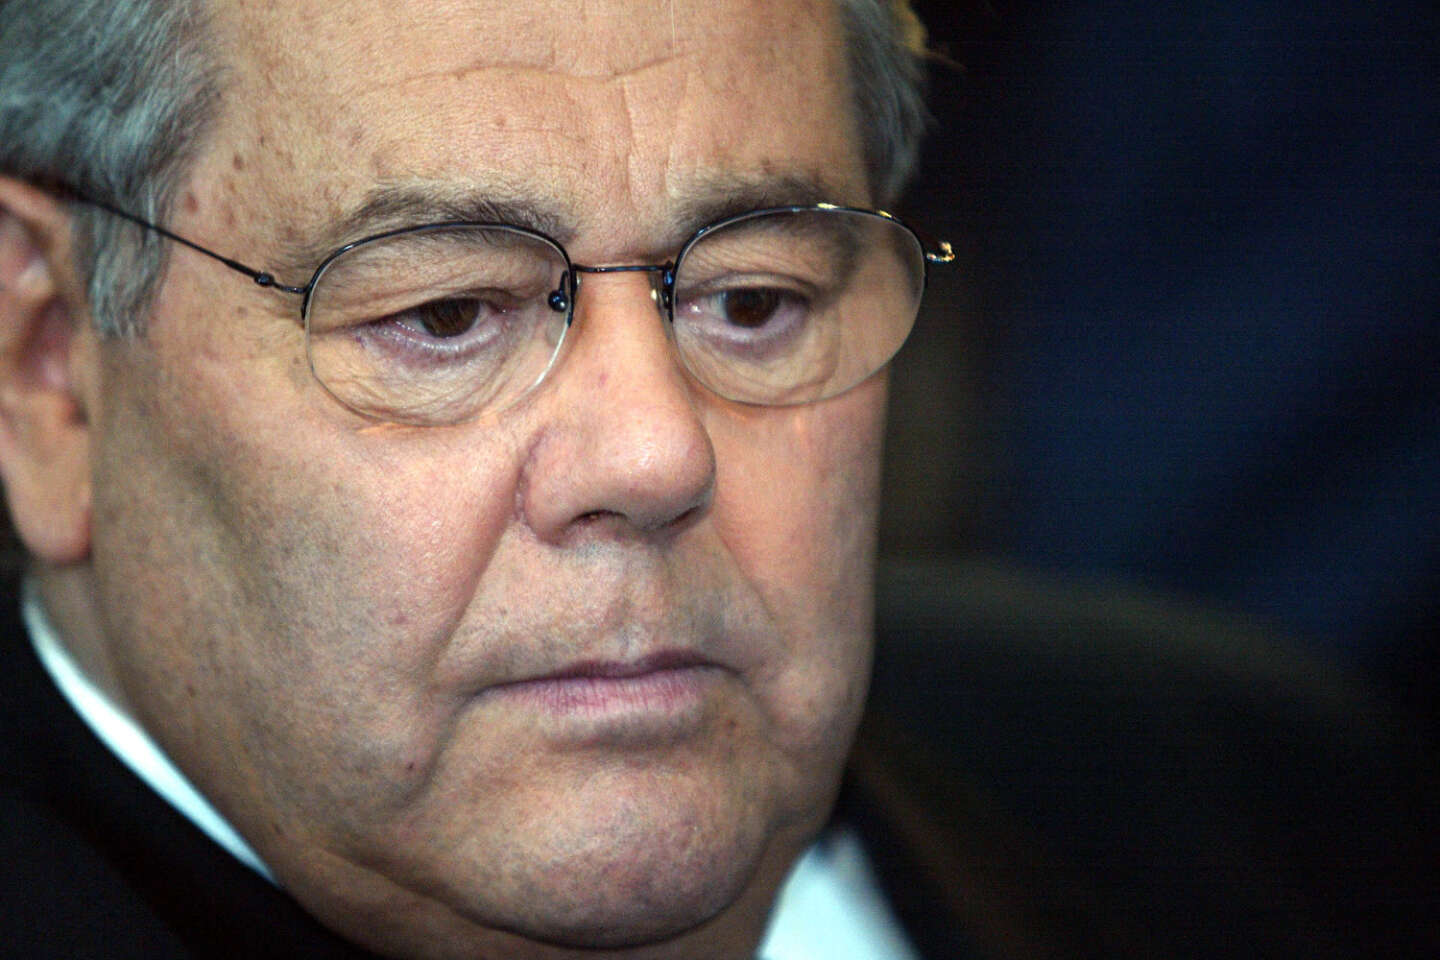 Claude Simonet, former president of the French Football Federation, is dead